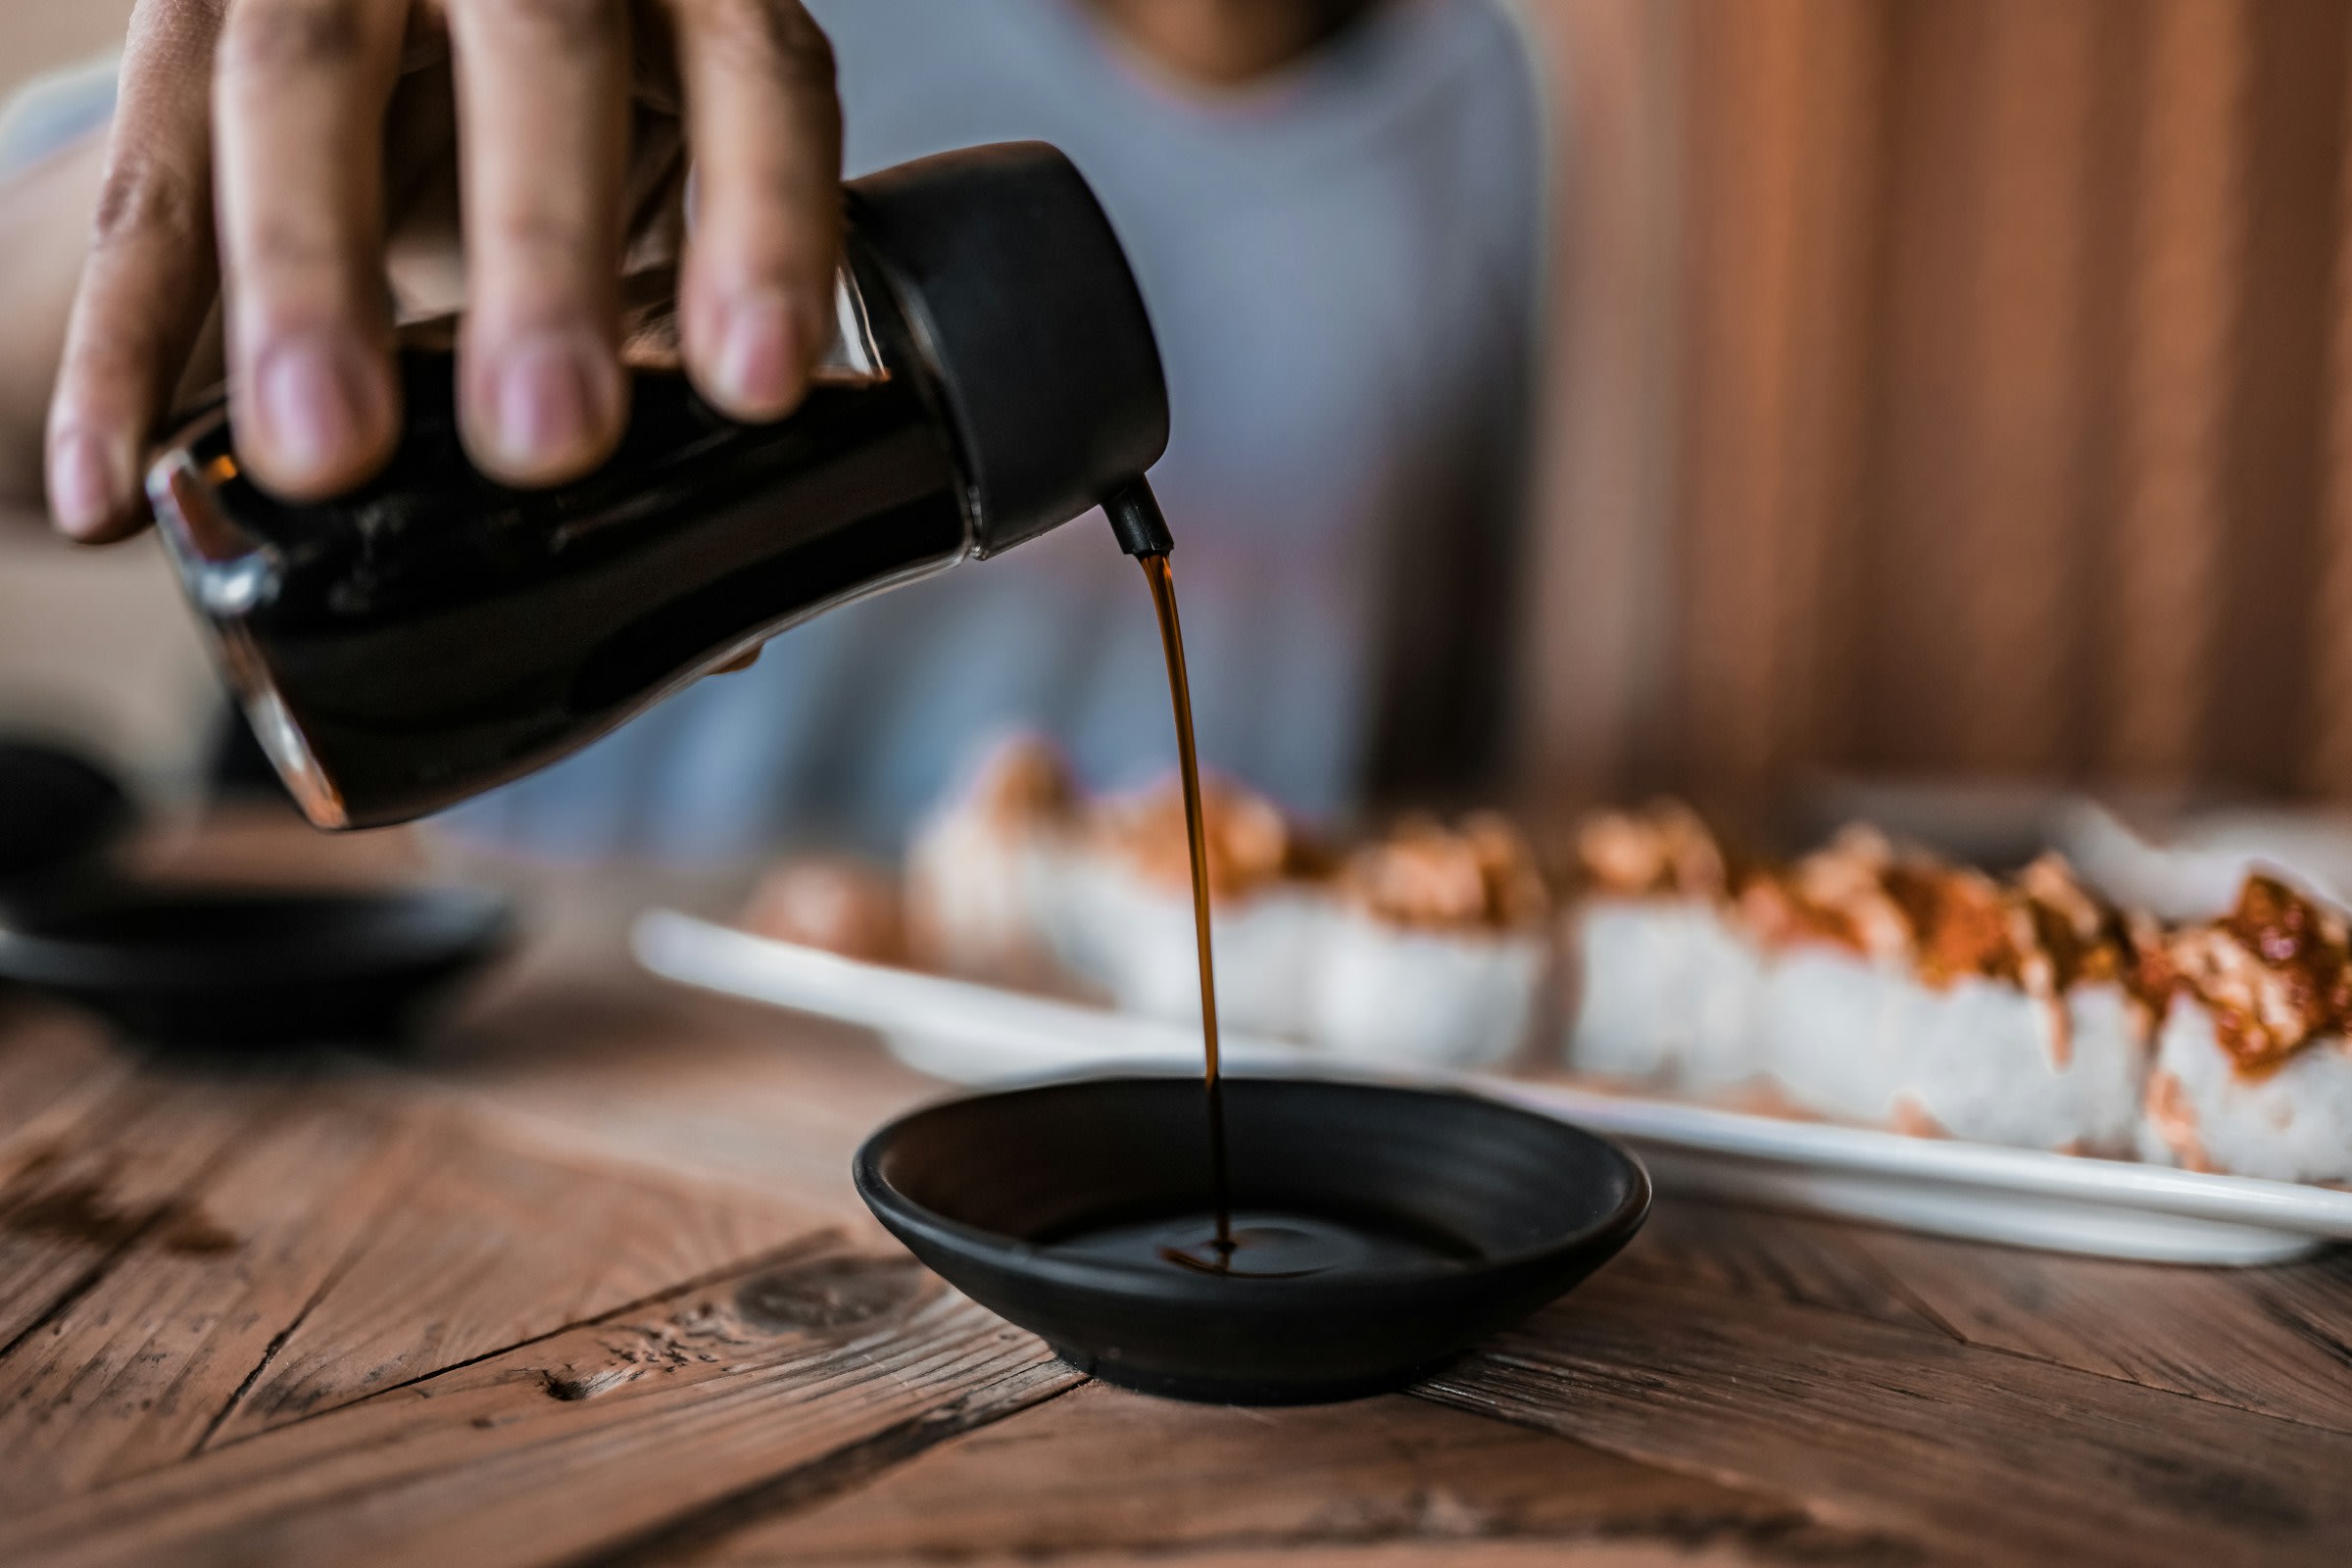 A hand holds a soy sauce dispenser and pours some into a small dish. There is a plate of sushi out of focus in the background.